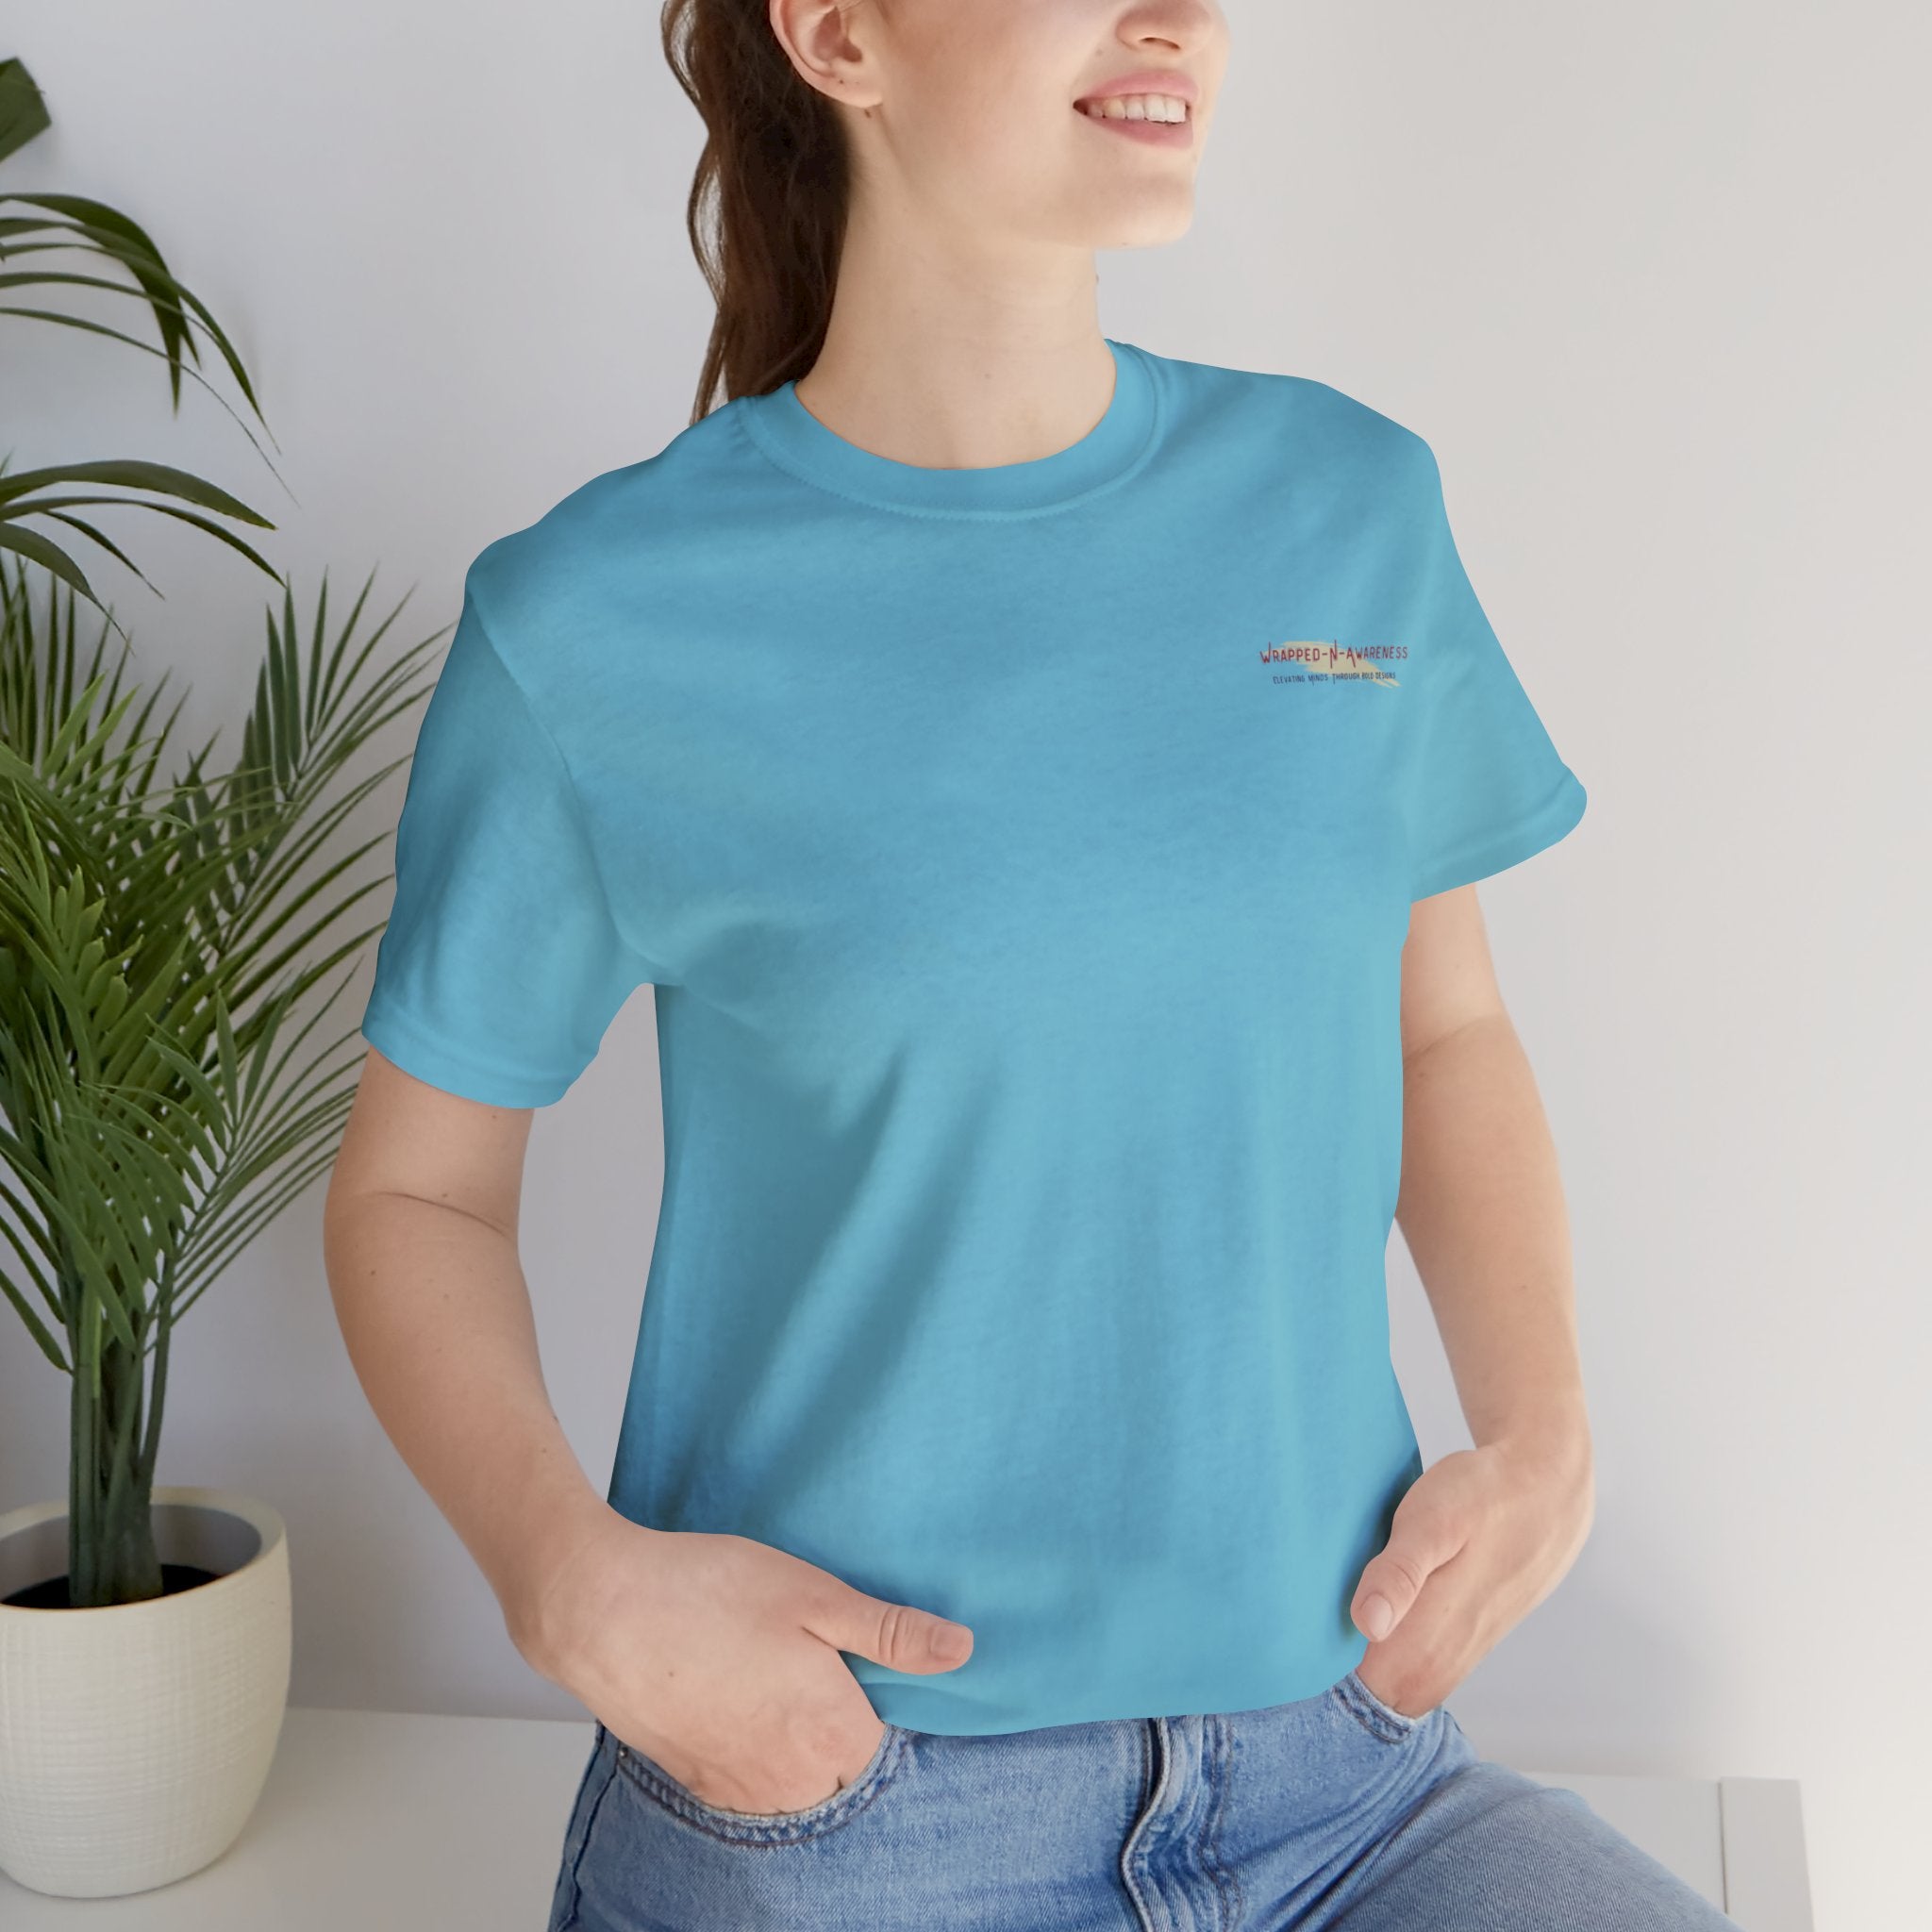 You Are Enough Short Sleeve Tee Bella+Canvas 3001 Heather Mauve Airlume Cotton Bella+Canvas 3001 Crew Neckline Jersey Short Sleeve Lightweight Fabric Mental Health Support Retail Fit Tear-away Label Tee Unisex Tee T-Shirt 5490673903375171081_2048 Printify